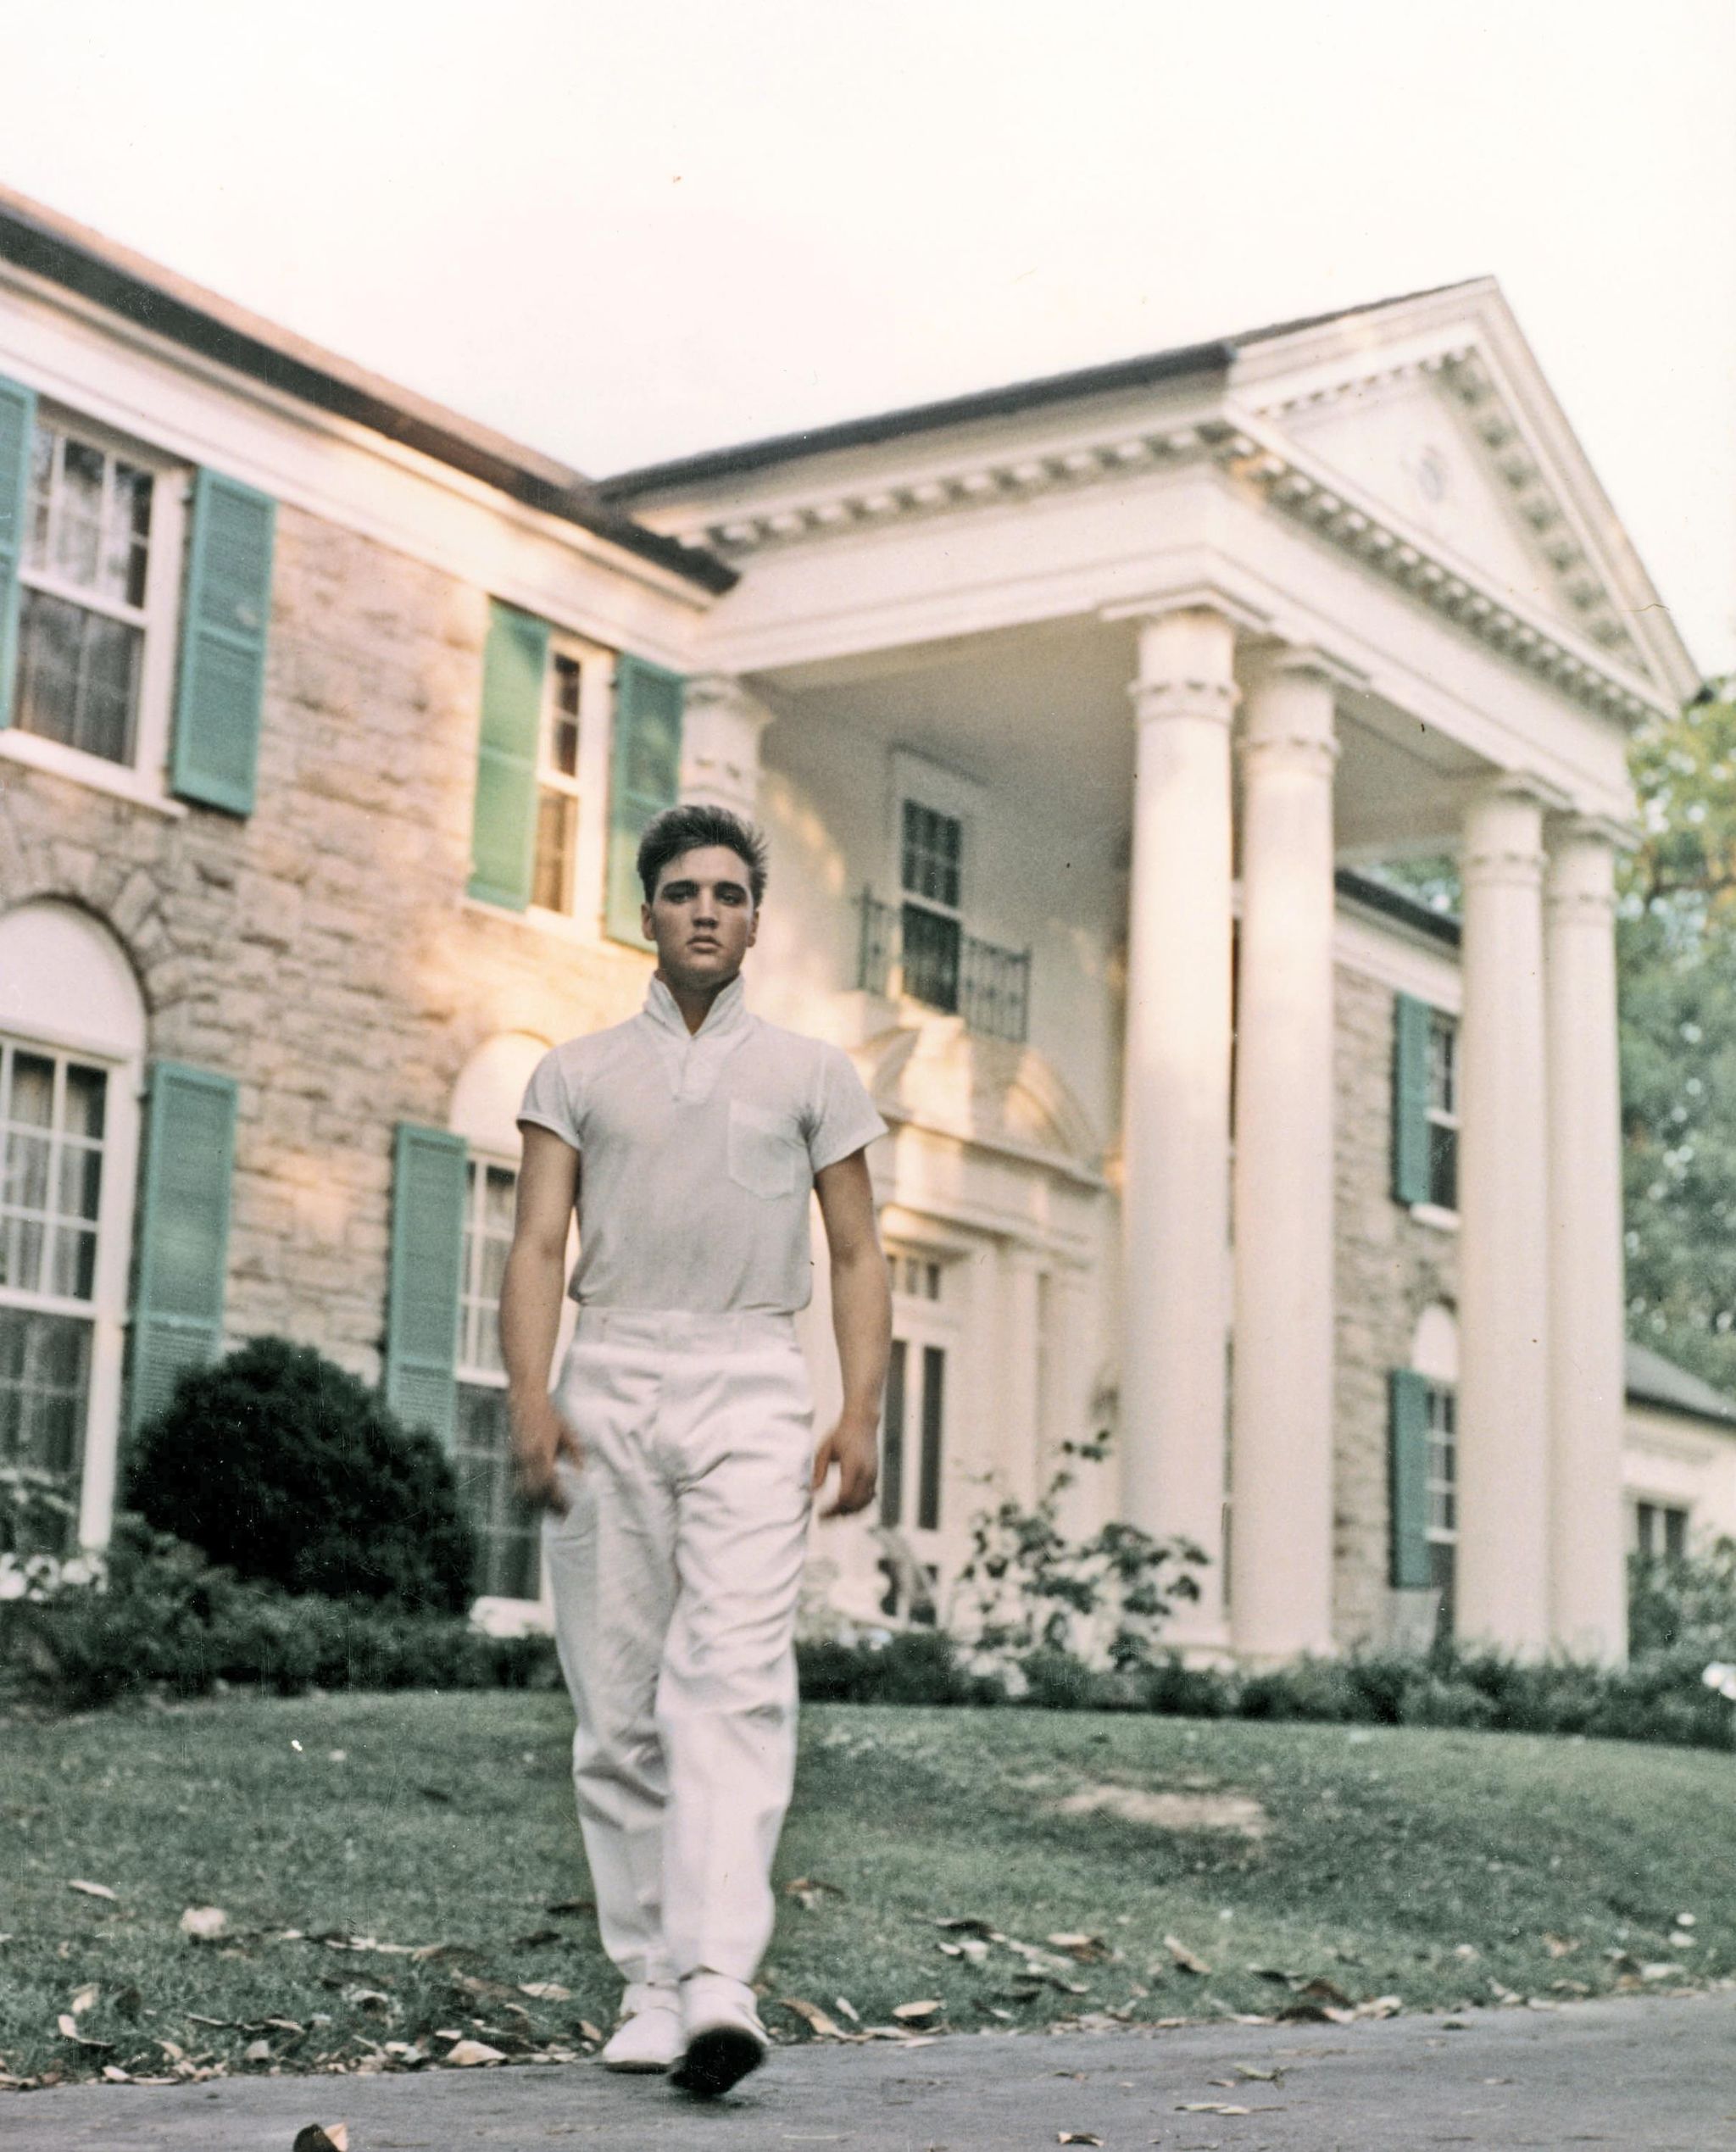 memphis, tn   circa 1957  rock and roll singer elvis presley strolls the grounds of his graceland estate in circa 1957 photo by michael ochs archivesgetty images